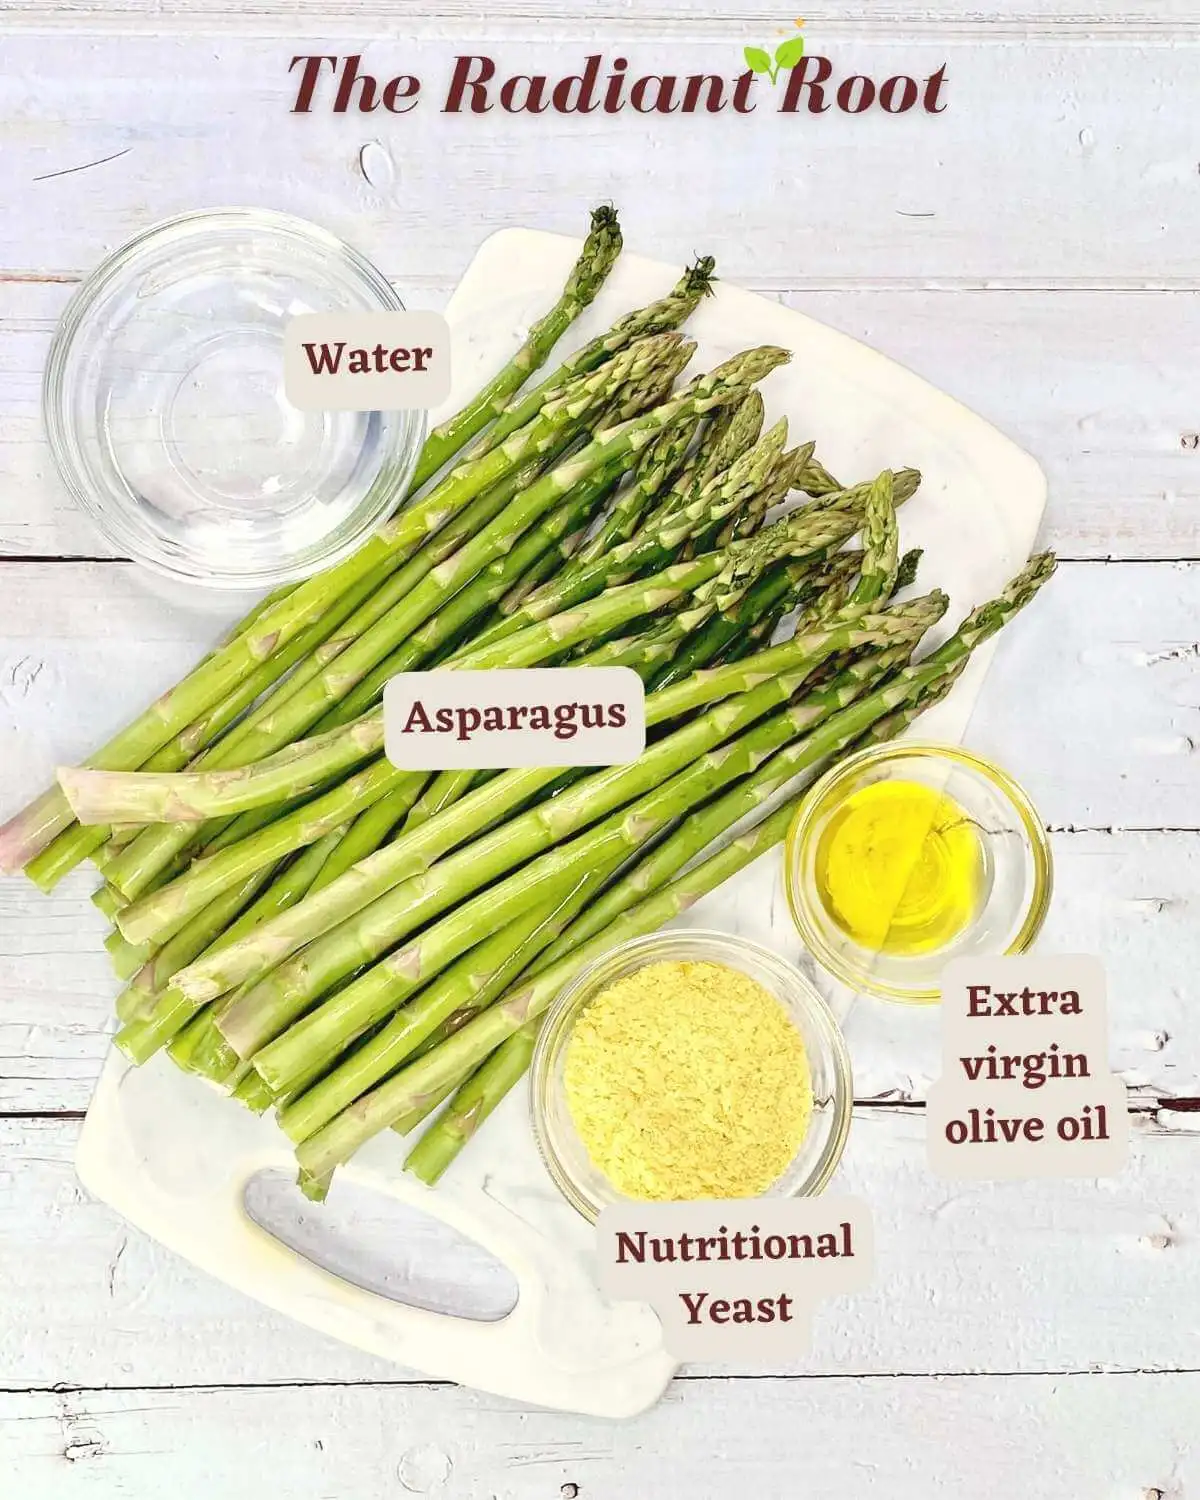 A white wooden table with a cutting board. At the top is reads “The Radiant Root.” On the table sits a pound of asparagus and three small clear mixing glasses holding the other ingredients: nutritional yeast, water, and extra virgin olive oil. | cheesy” asparagus recipe | The Radiant Root